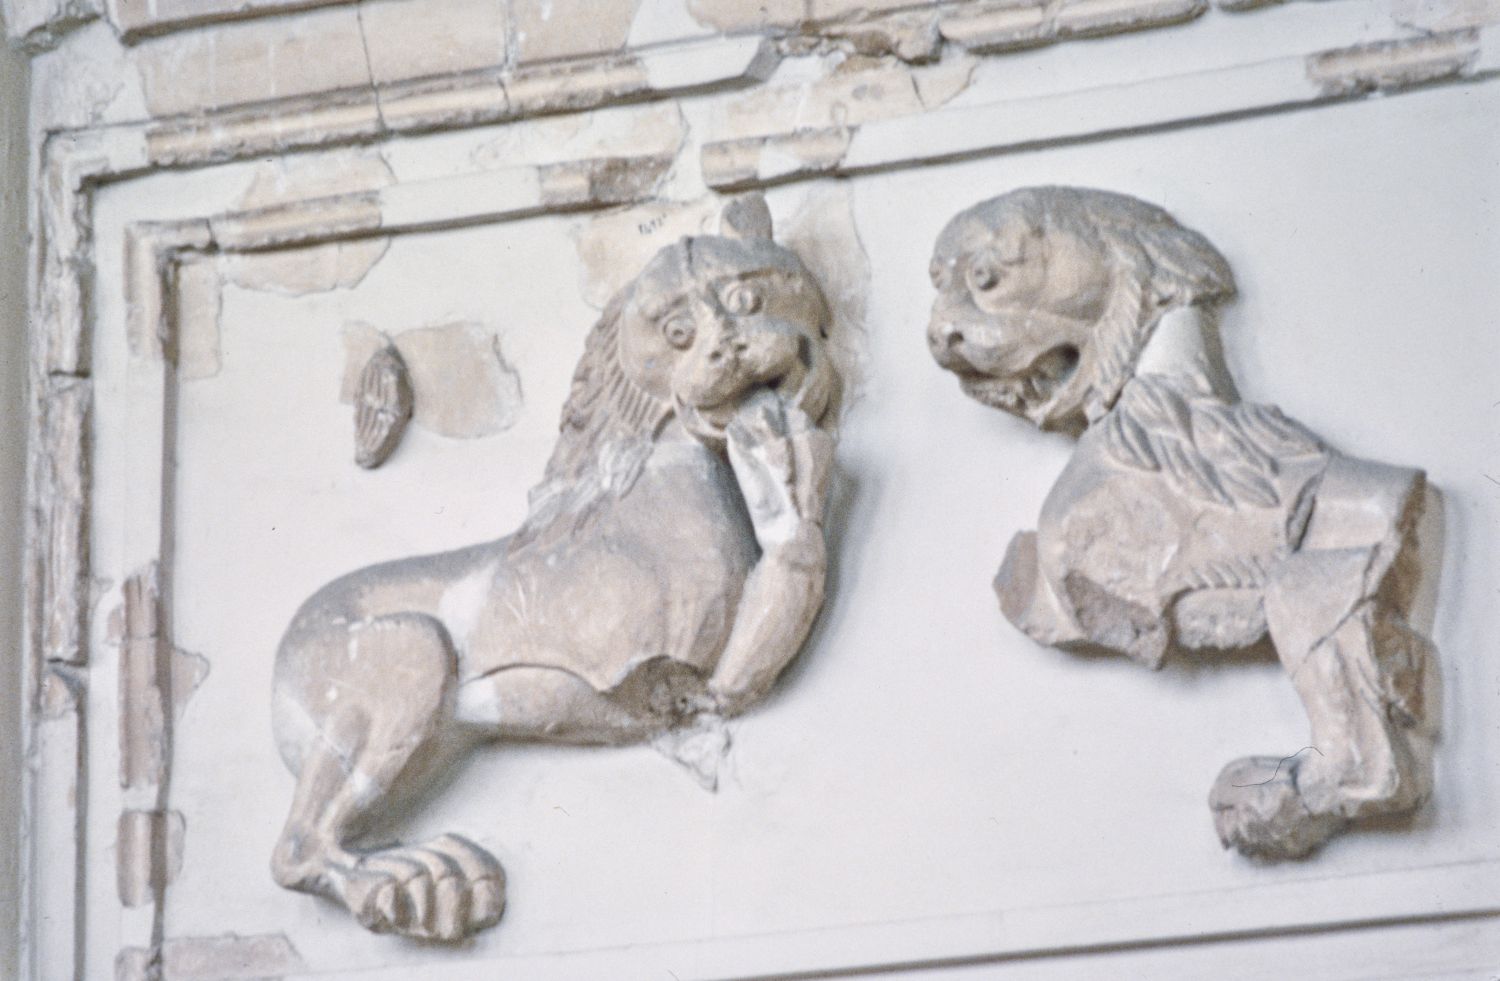 Reconstructed rampant lions found at Qasr al-Hayr al-Gharbi on display at the National Museum, Damascus.